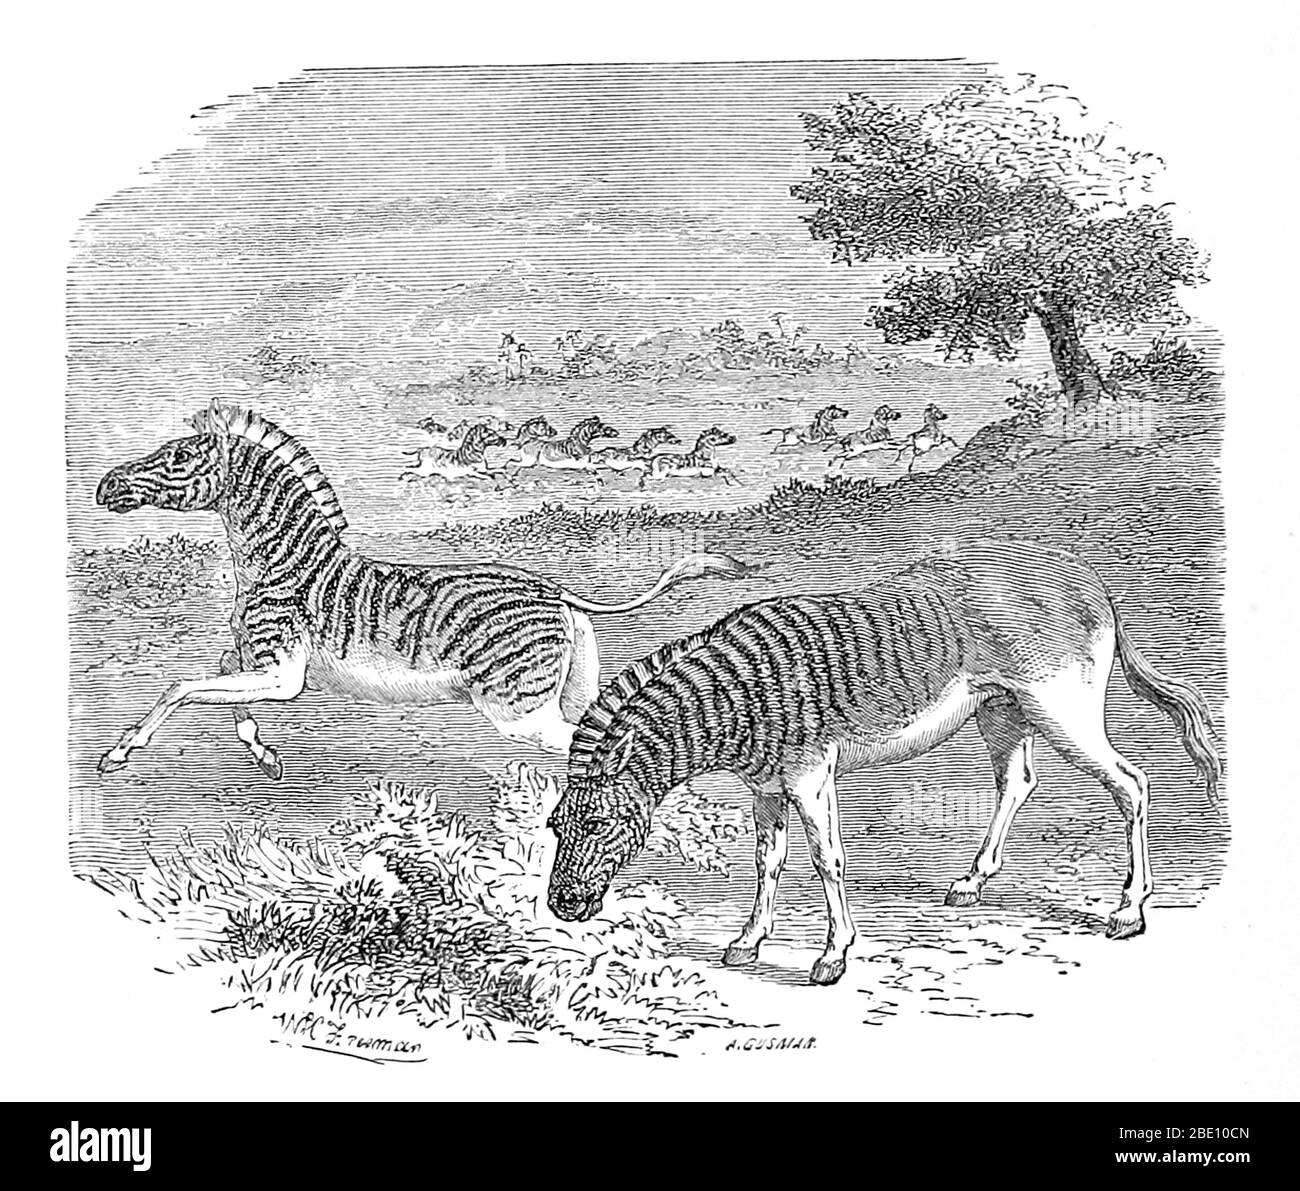 An illustration from 1869 of a zebra (left) and a quagga (right). Quagga (Equus quagga quagga) is an extinct subspecies of the plains zebra that lived in South Africa until the nineteenth century. It was long thought to be a distinct species, but genetic studies have shown it to be the southernmost subspecies of the plains zebra. It is considered particularly close to Burchell's zebra. Its name is derived from its call, which sounds like 'kwa-ha-ha'. The last captive specimen died in Amsterdam on 12 August 1883. In 1984, the quagga was the first extinct animal to have its DNA analysed, and the Stock Photo